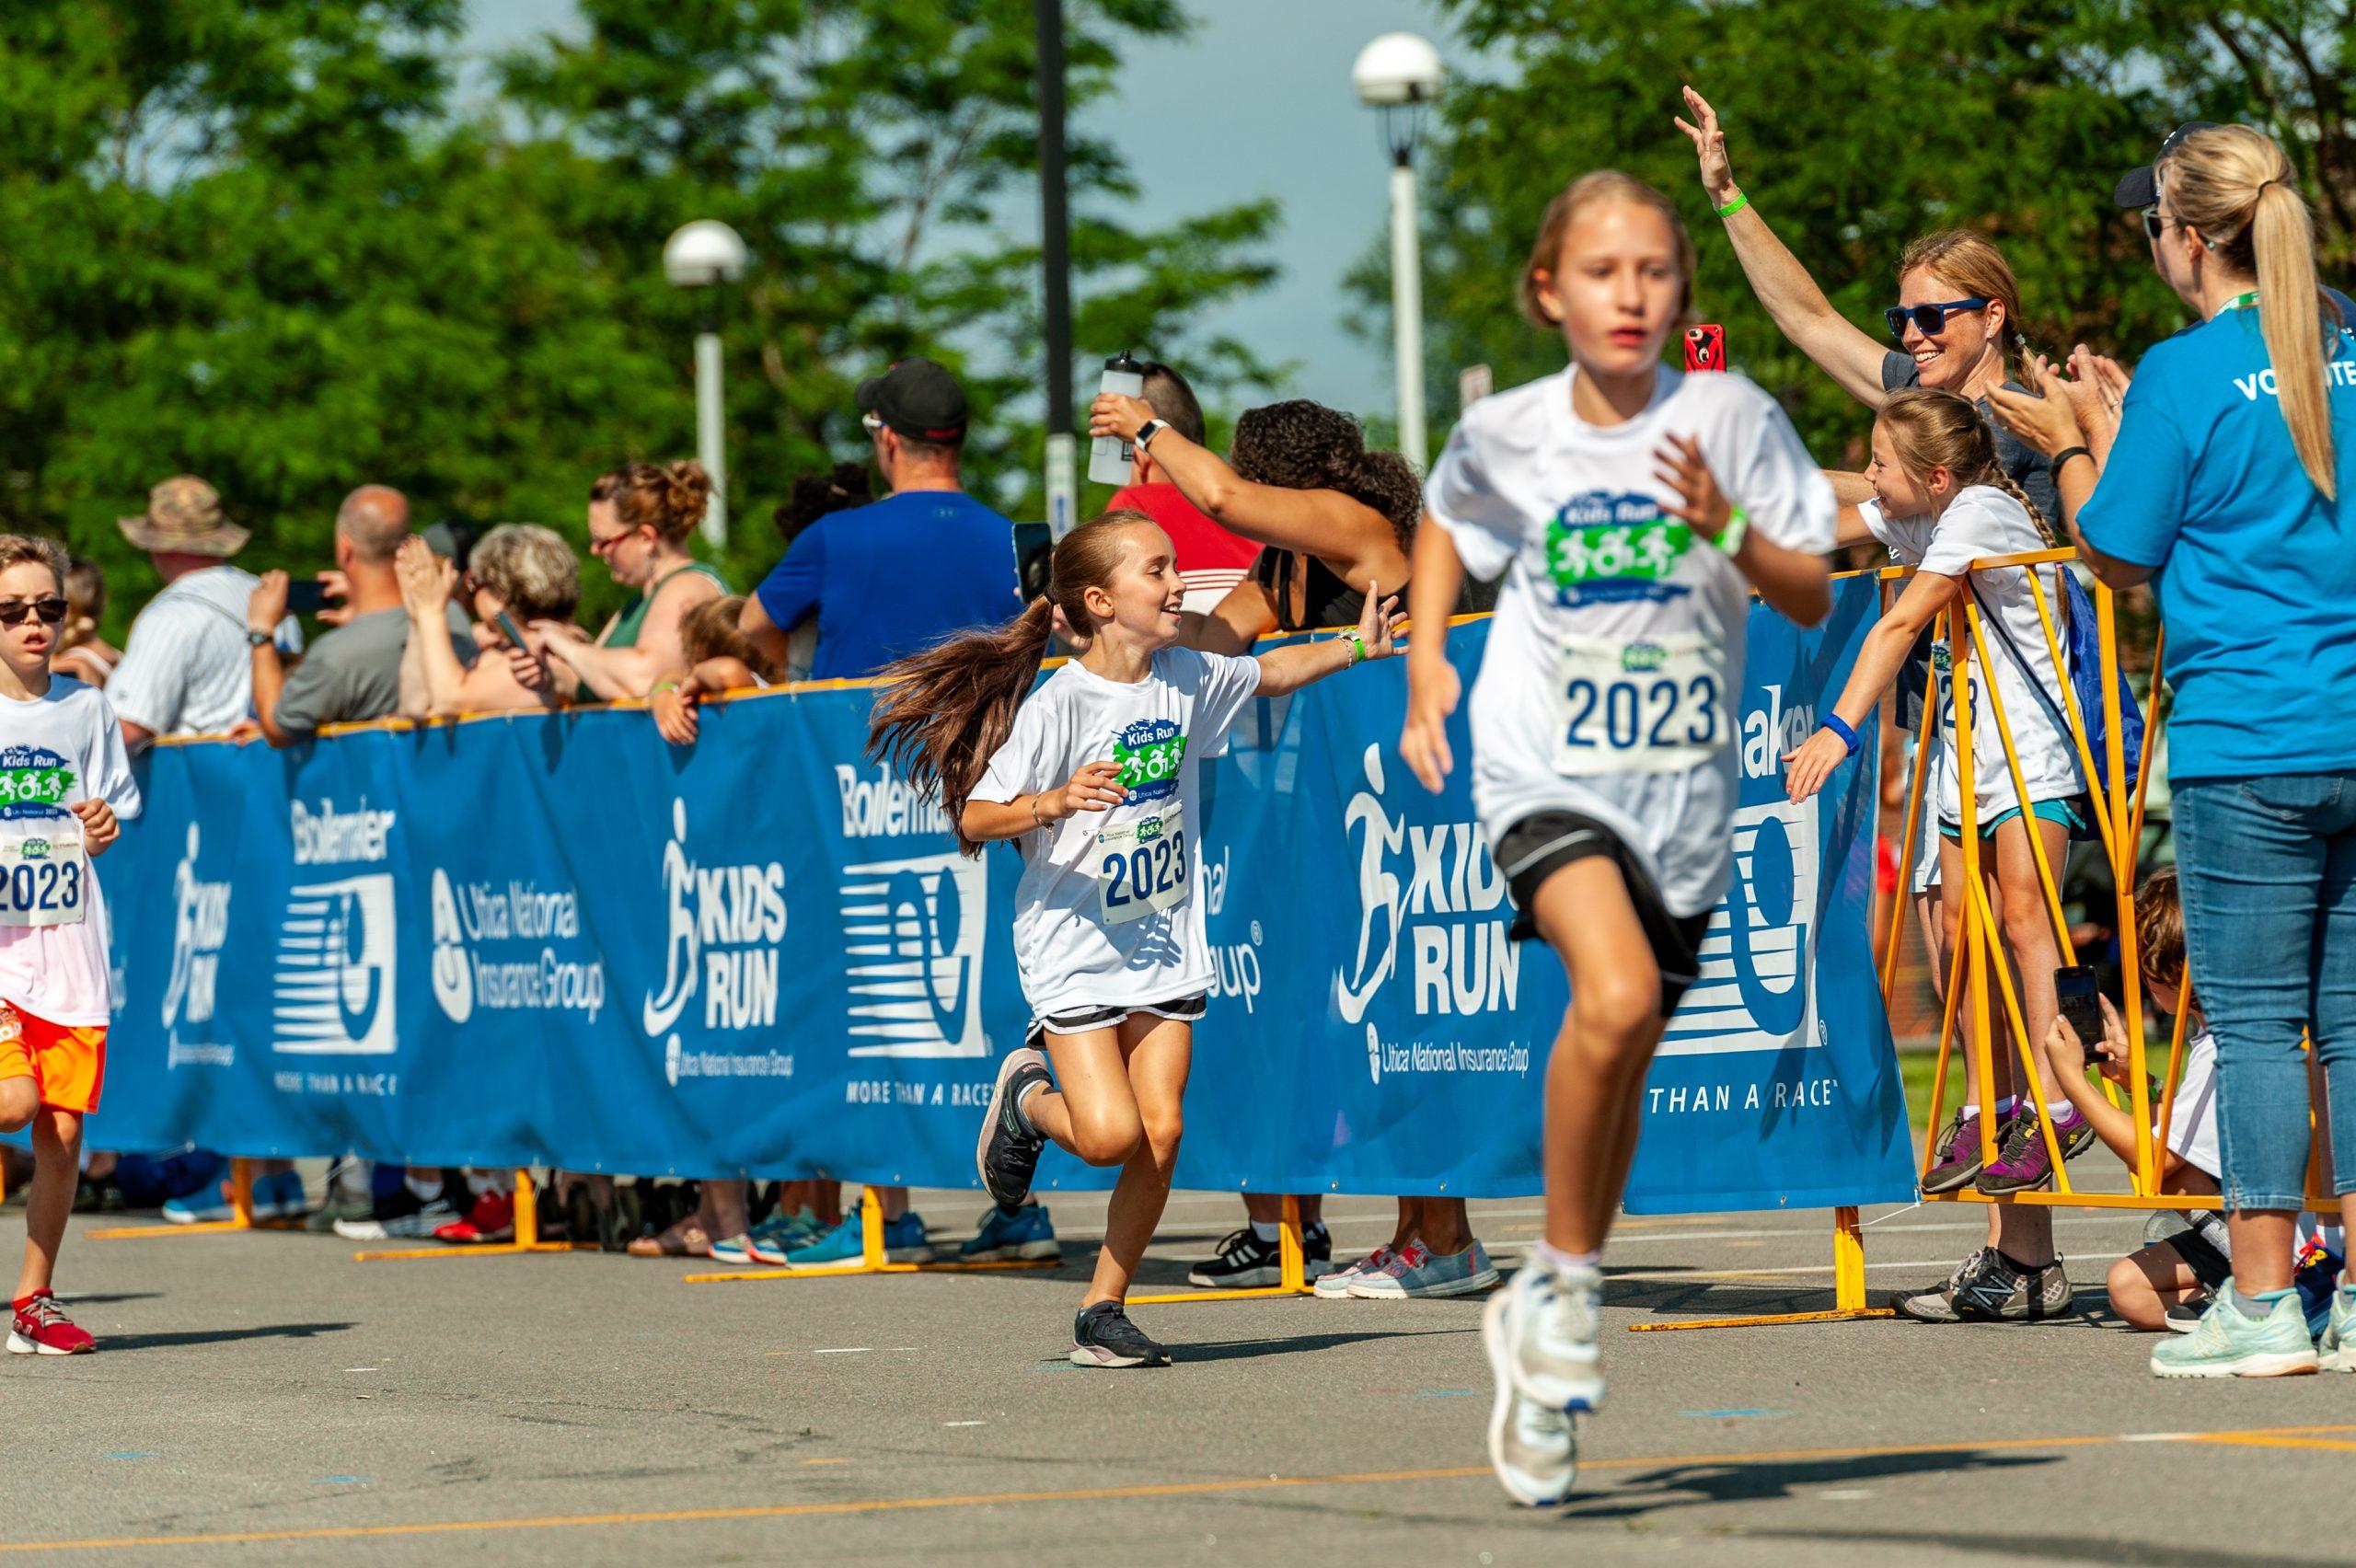 A child waves while running the Boilermaker 2023 Kids Run.